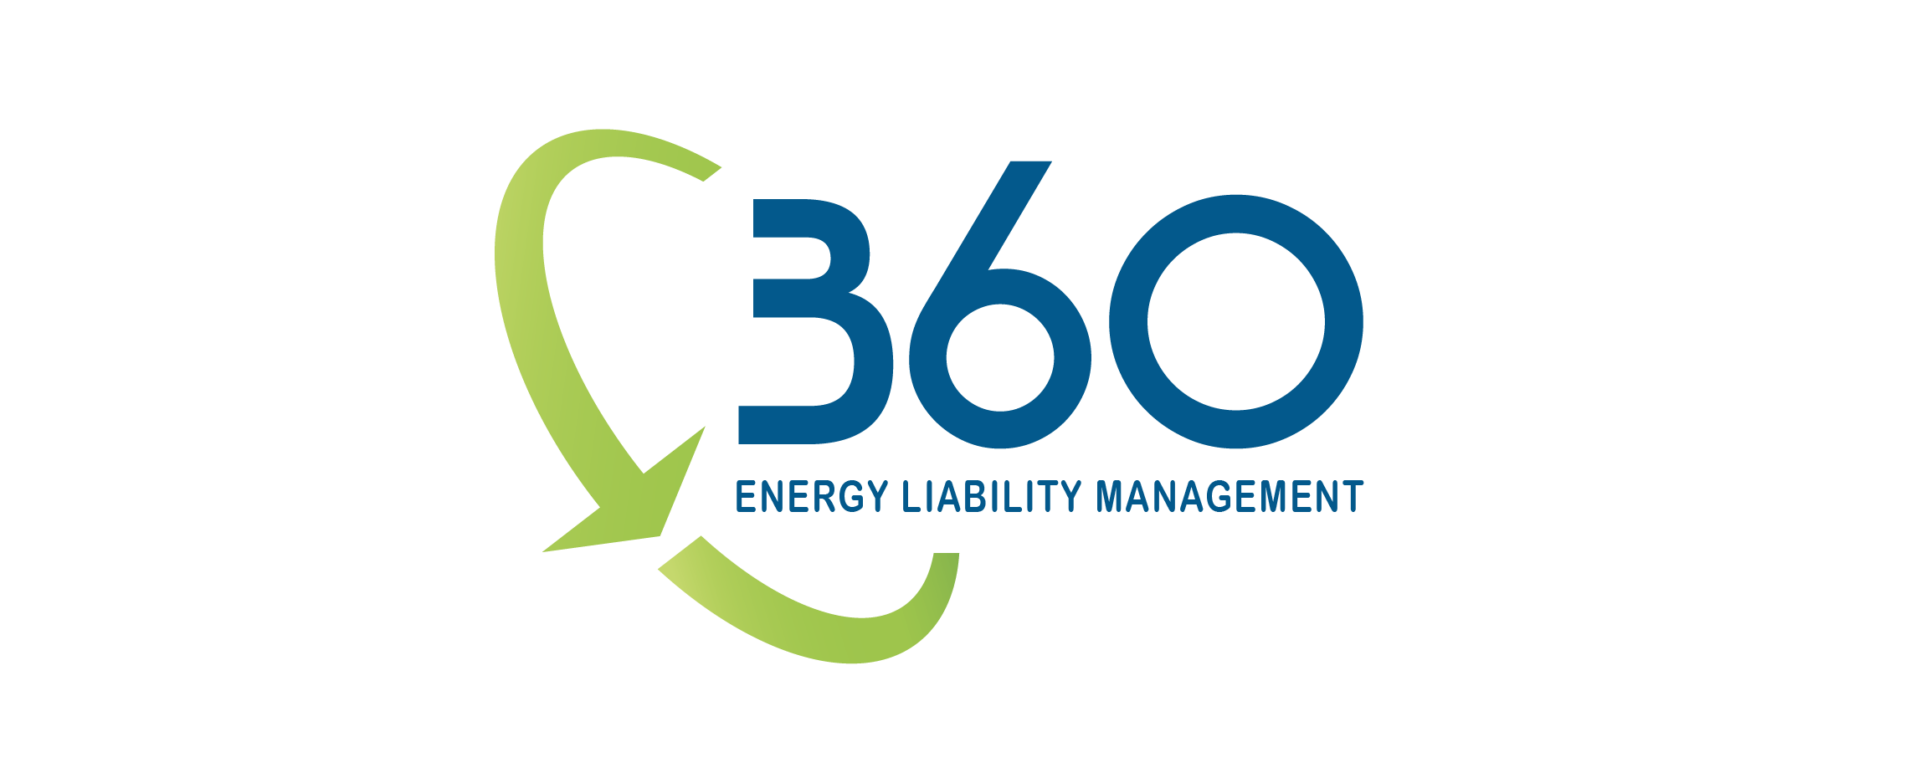 Original 360 Energy Liability Management logo. The logo had 360 in large blue text and Energy Liability Management just below it in smaller text, and to the left of the text there is a green swoop with an arrow indicating a full circle.